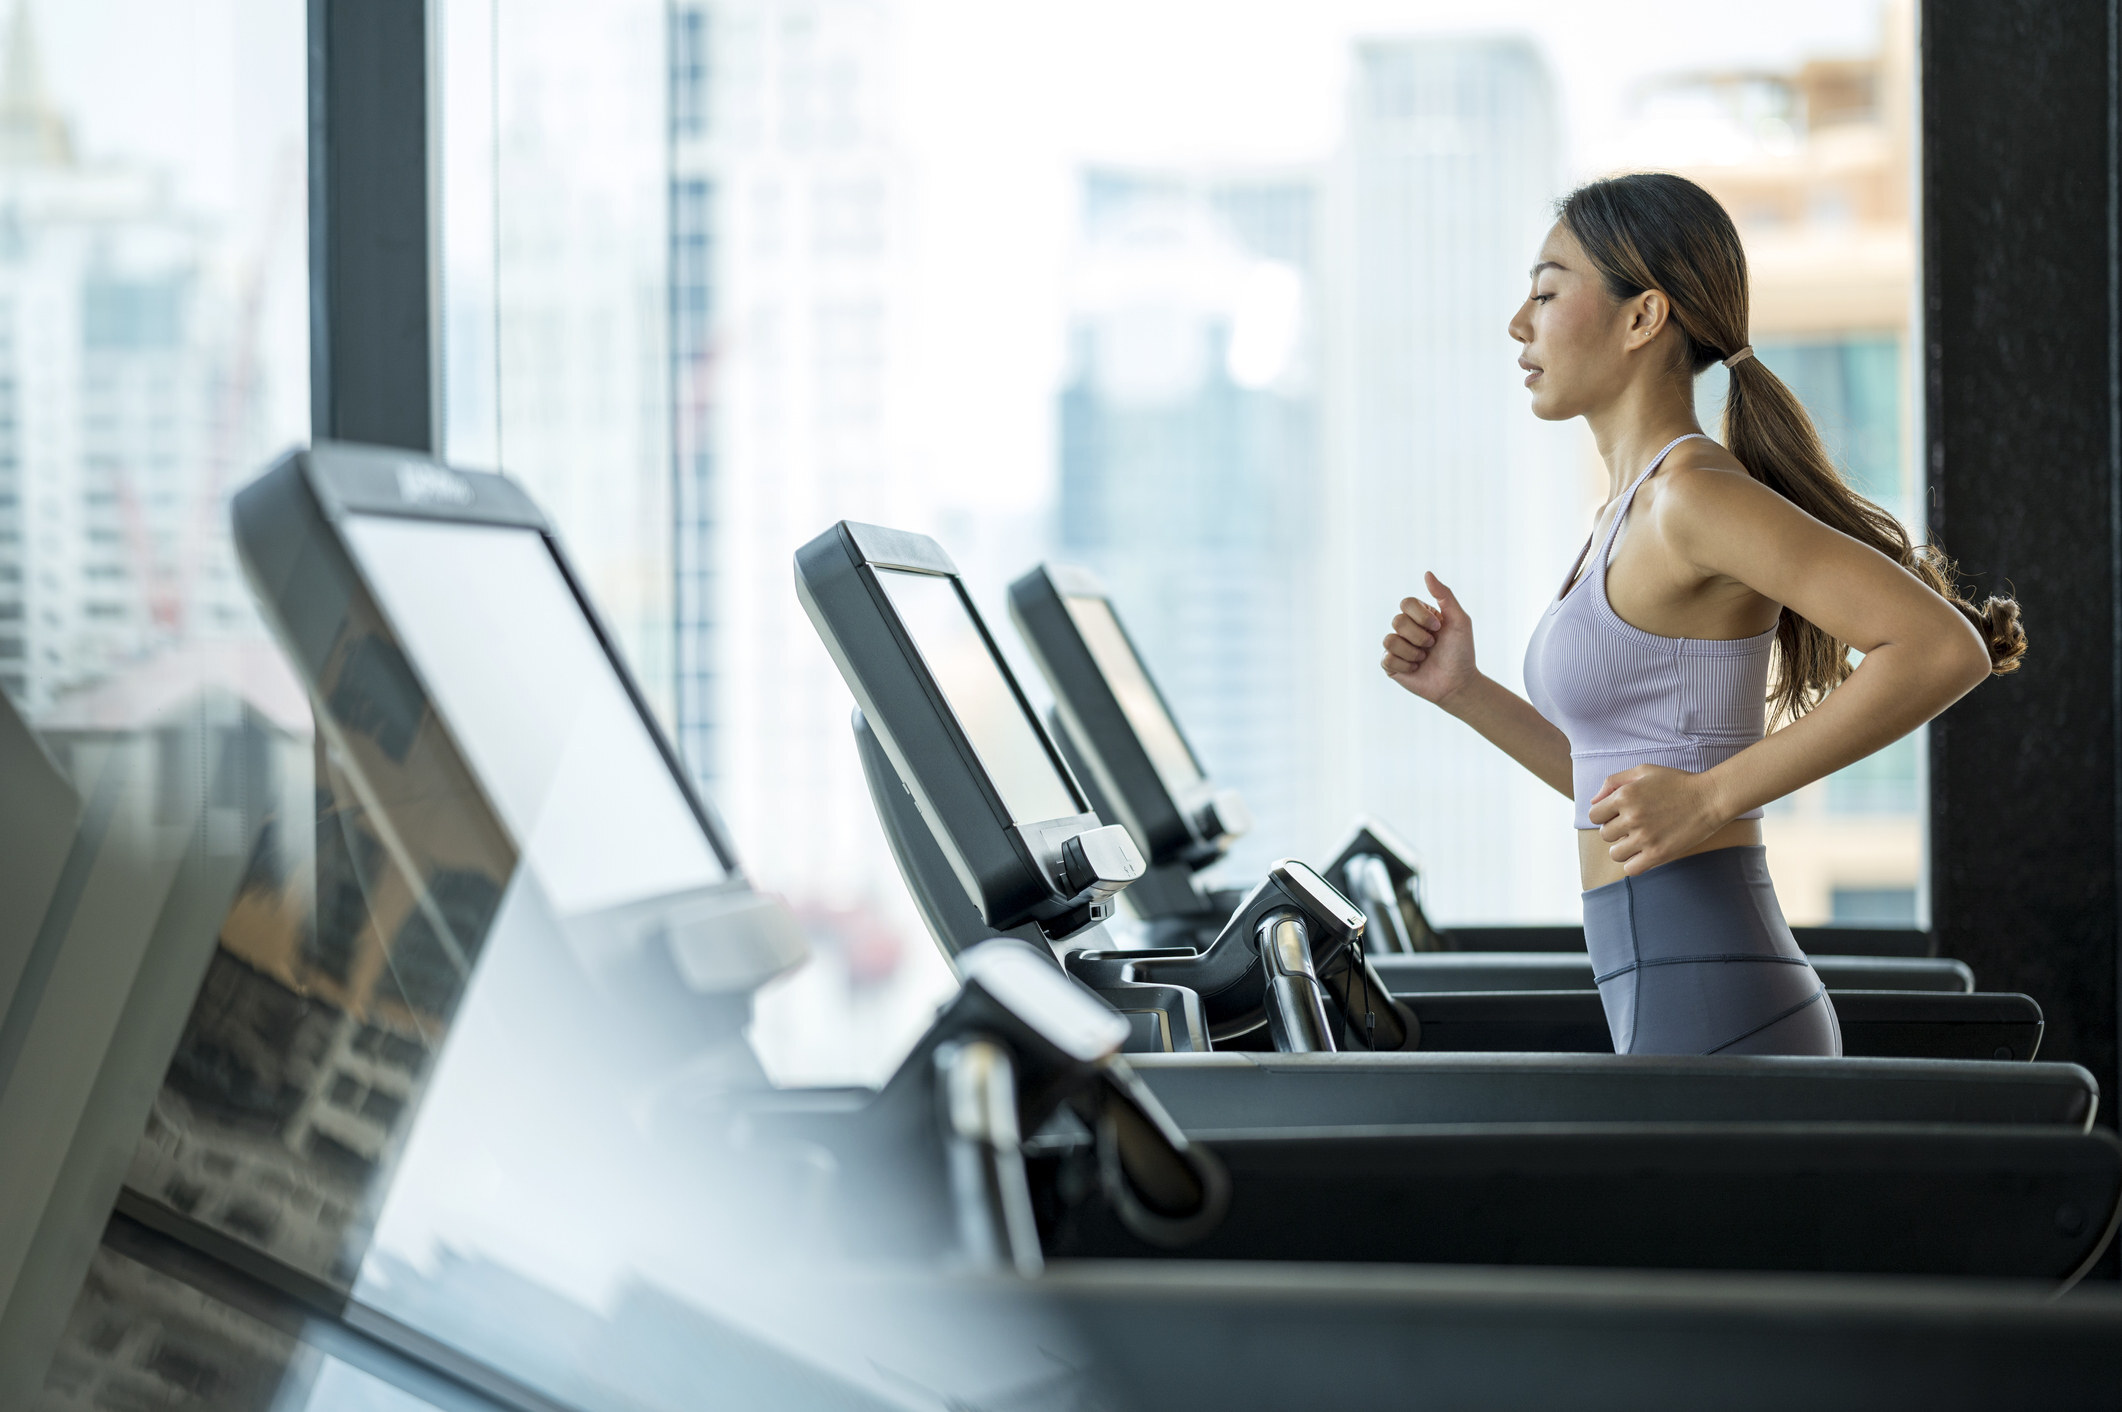 Fit and healthy women burn more fat than men during exercise. Photo: Getty Images